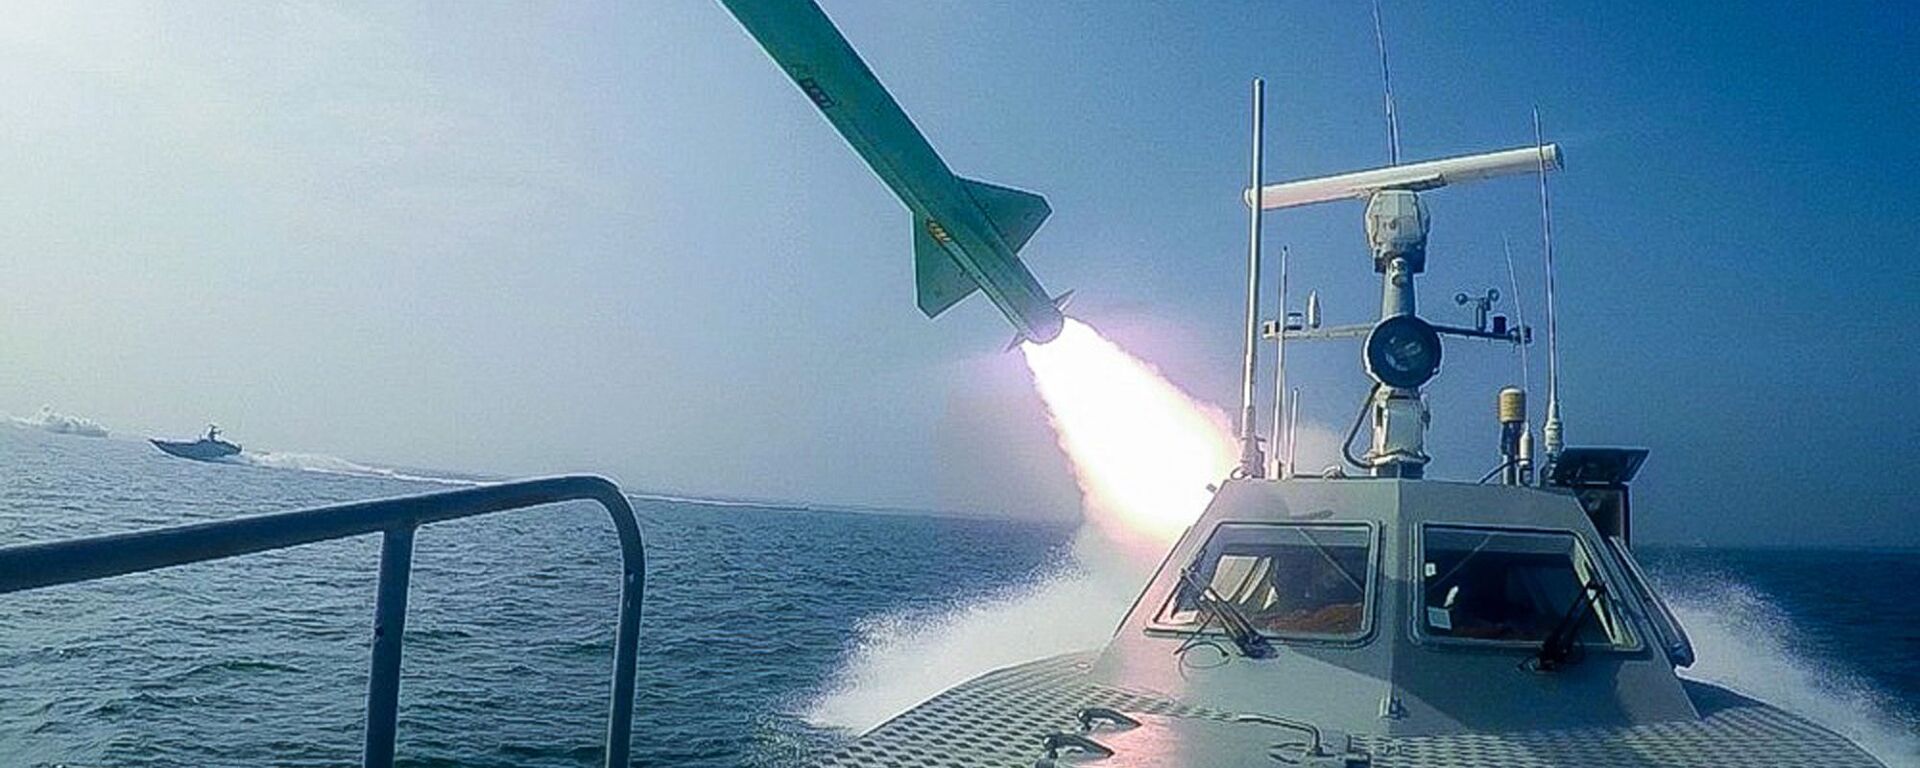 In this photo released Tuesday, July 28, 2020, by Sepahnews, a Revolutionary Guard's speed boat fires a missile during a military exercise - Sputnik International, 1920, 11.01.2021